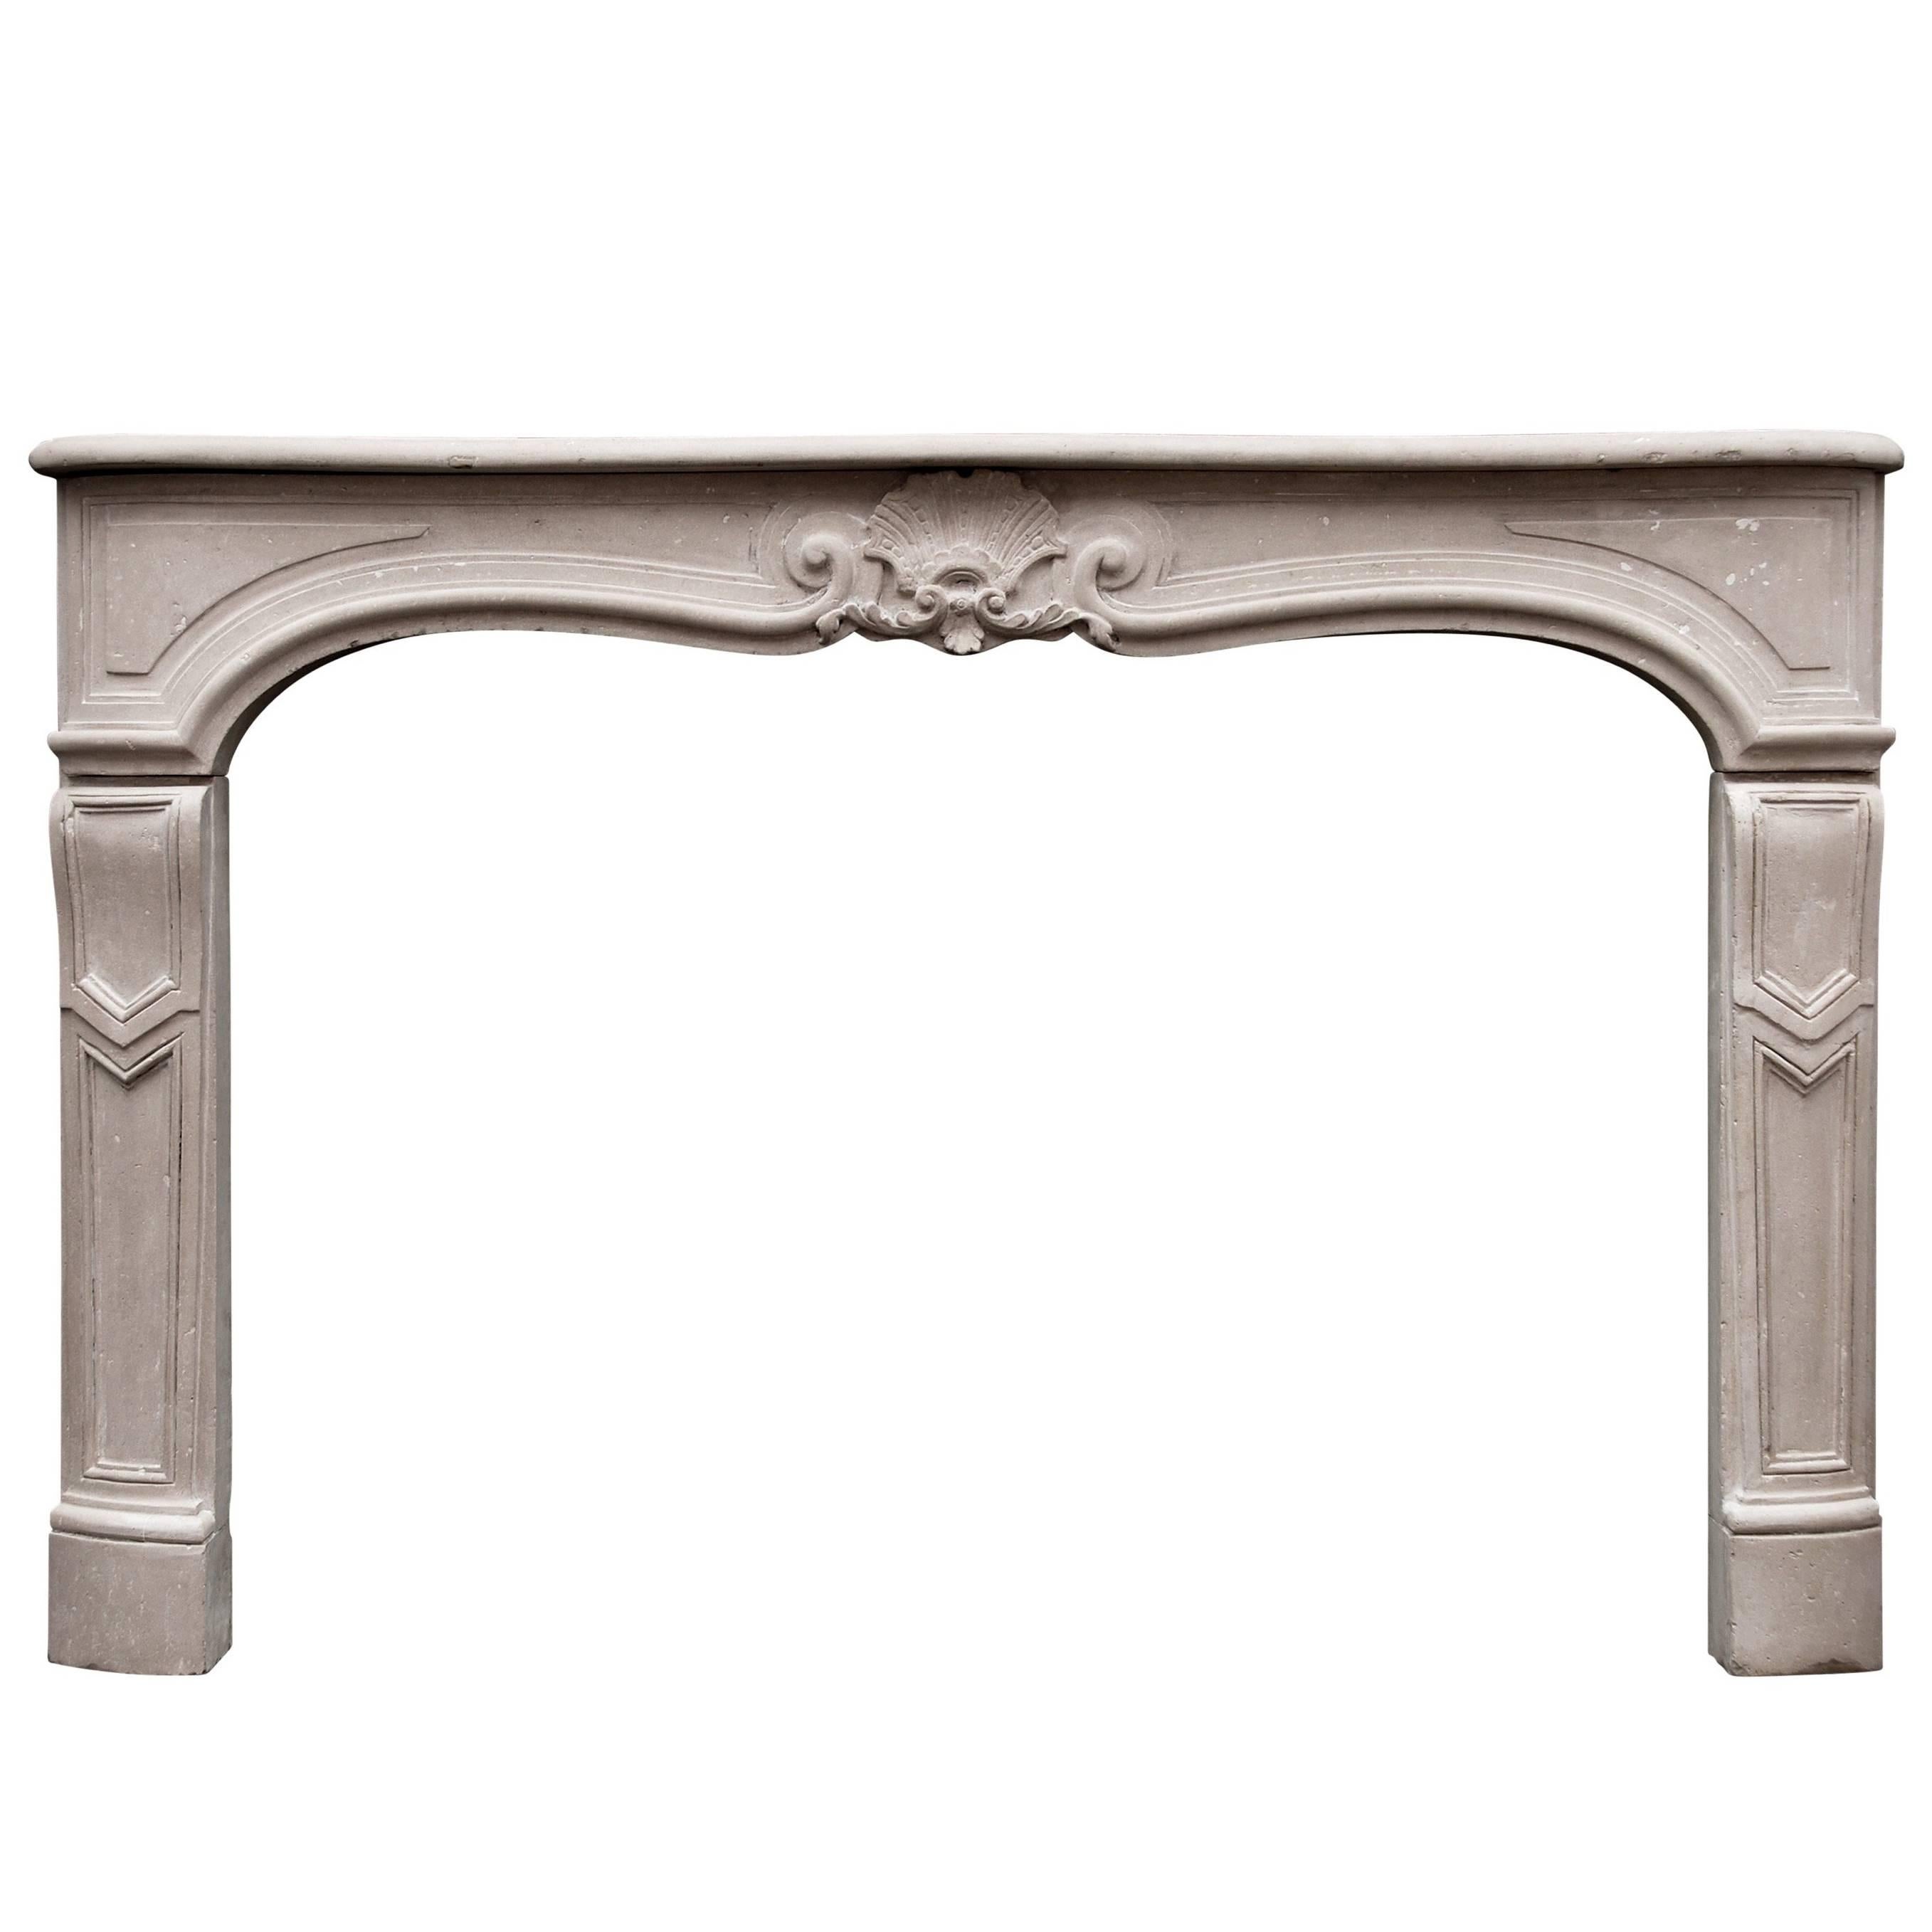 18th Century Louis XV Caen Stone Fireplace For Sale